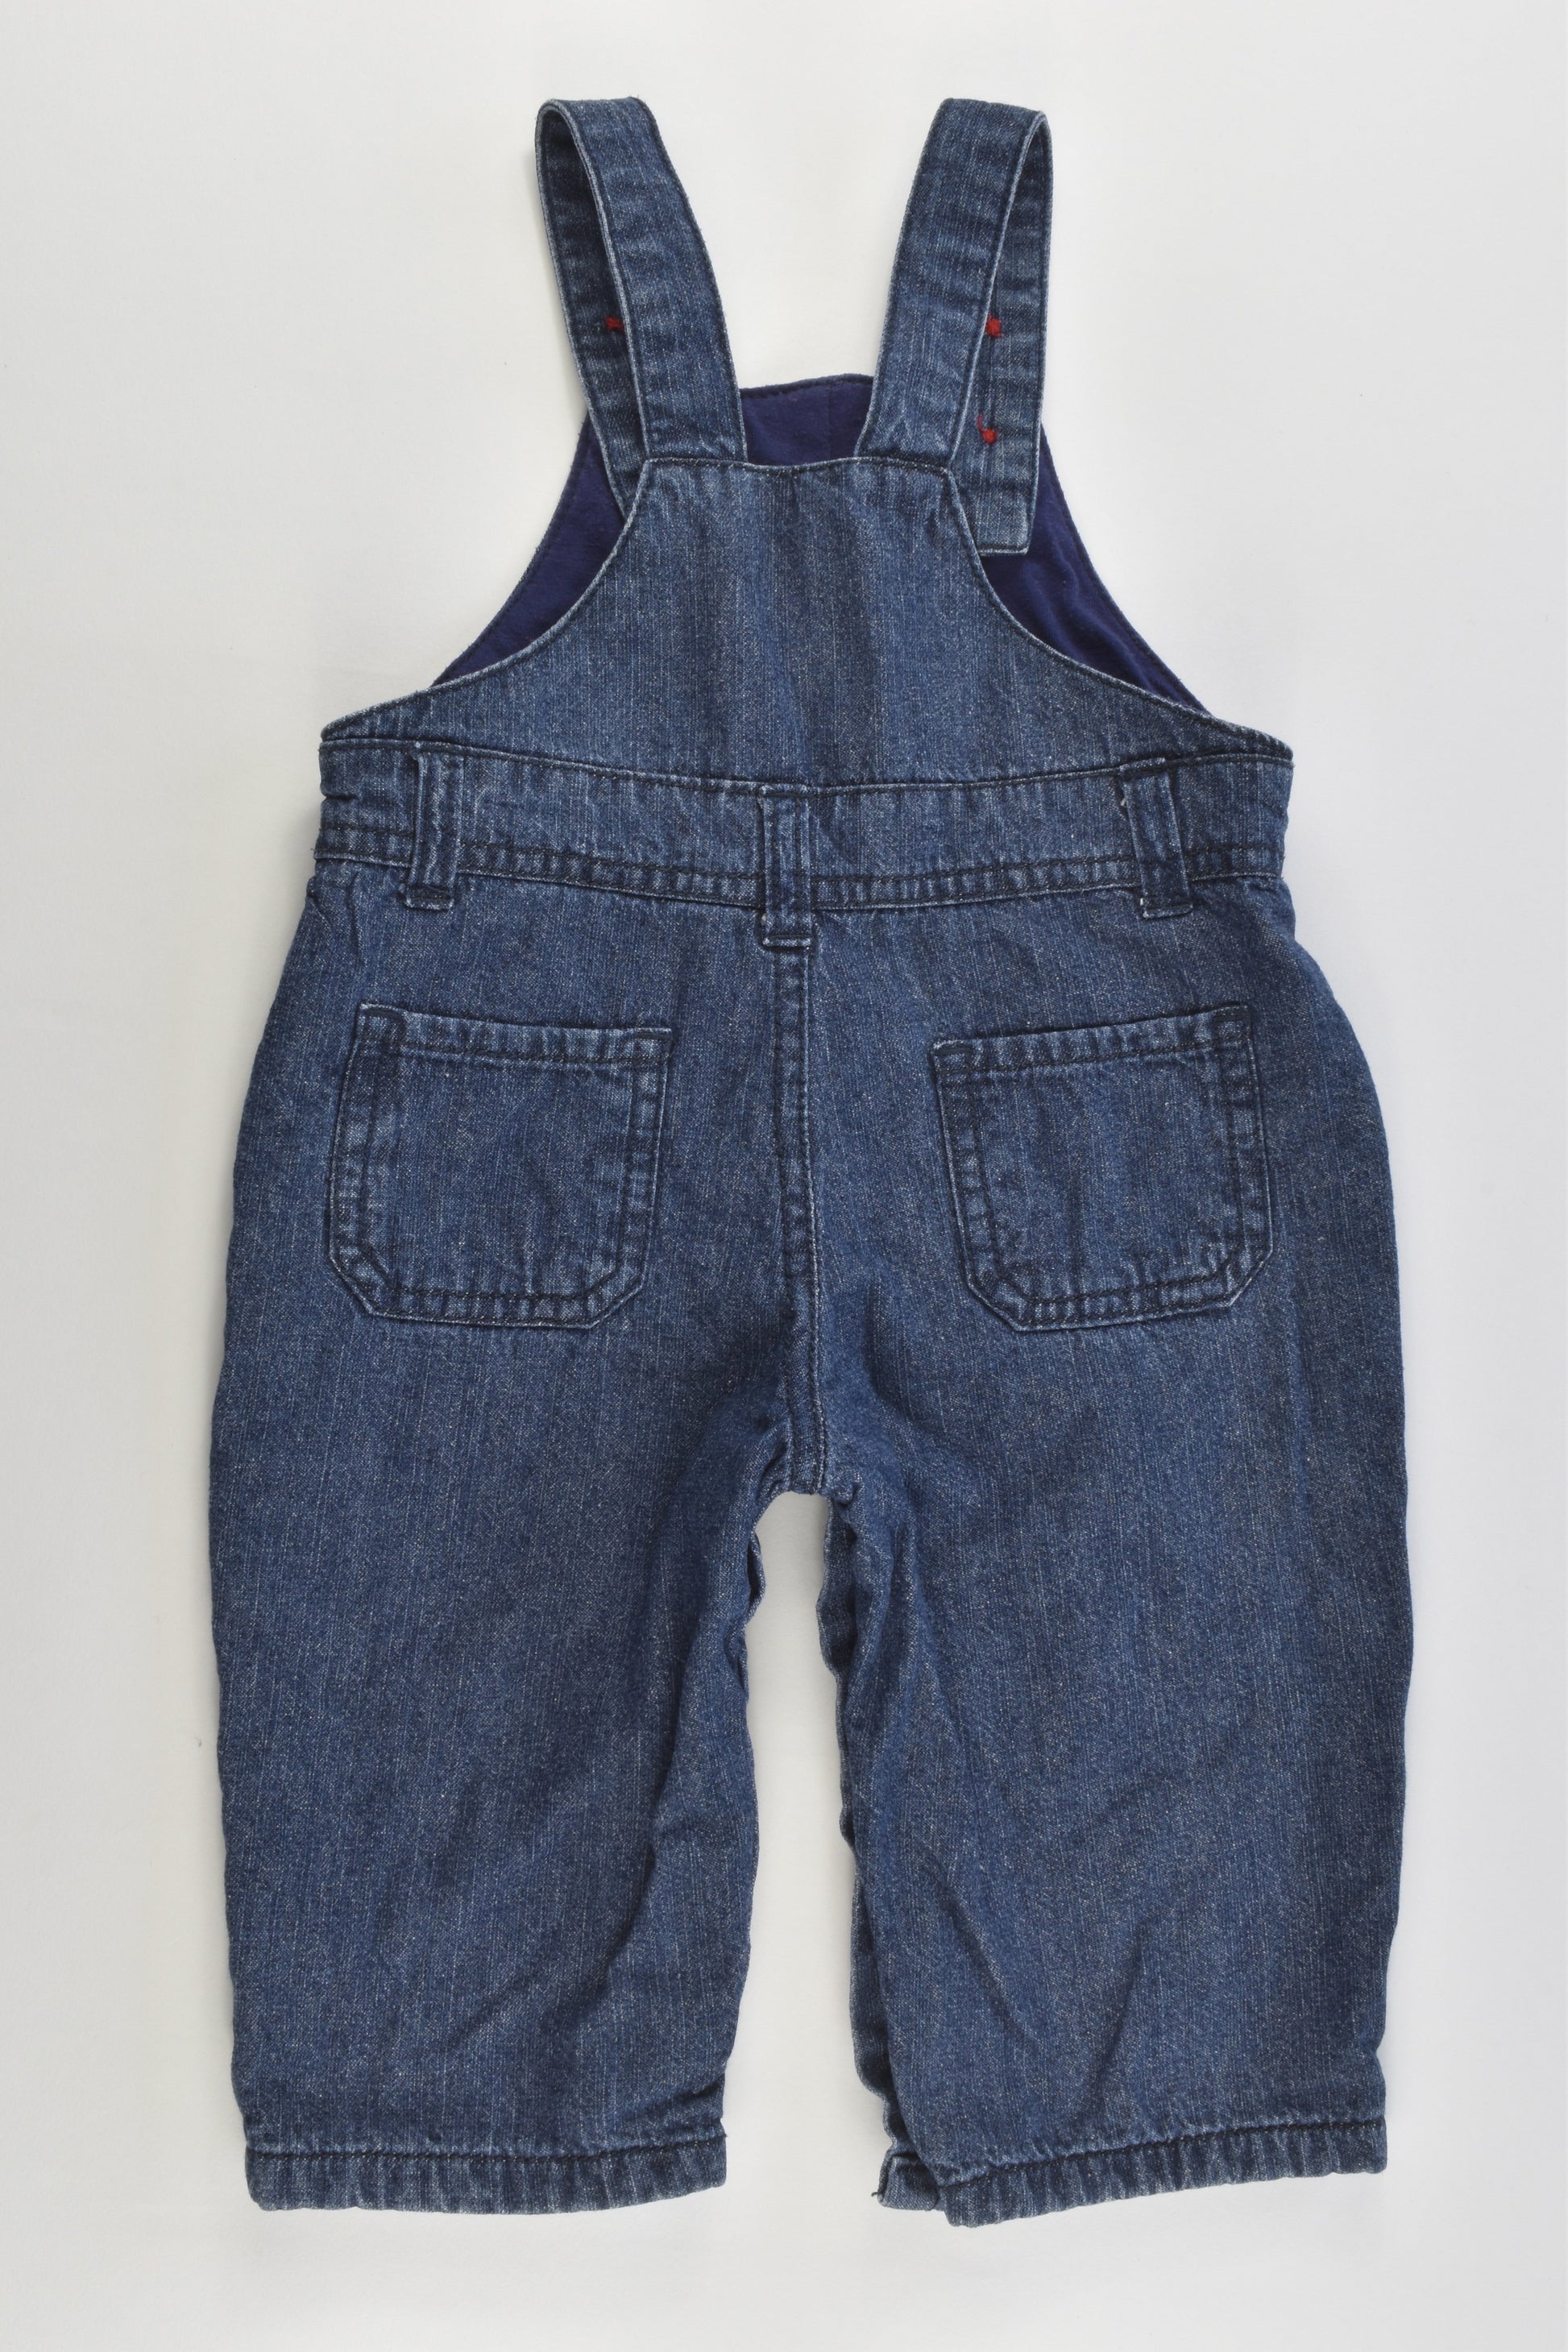 Baby Berry Size 00 (3-6 months) Lined Denim Overalls